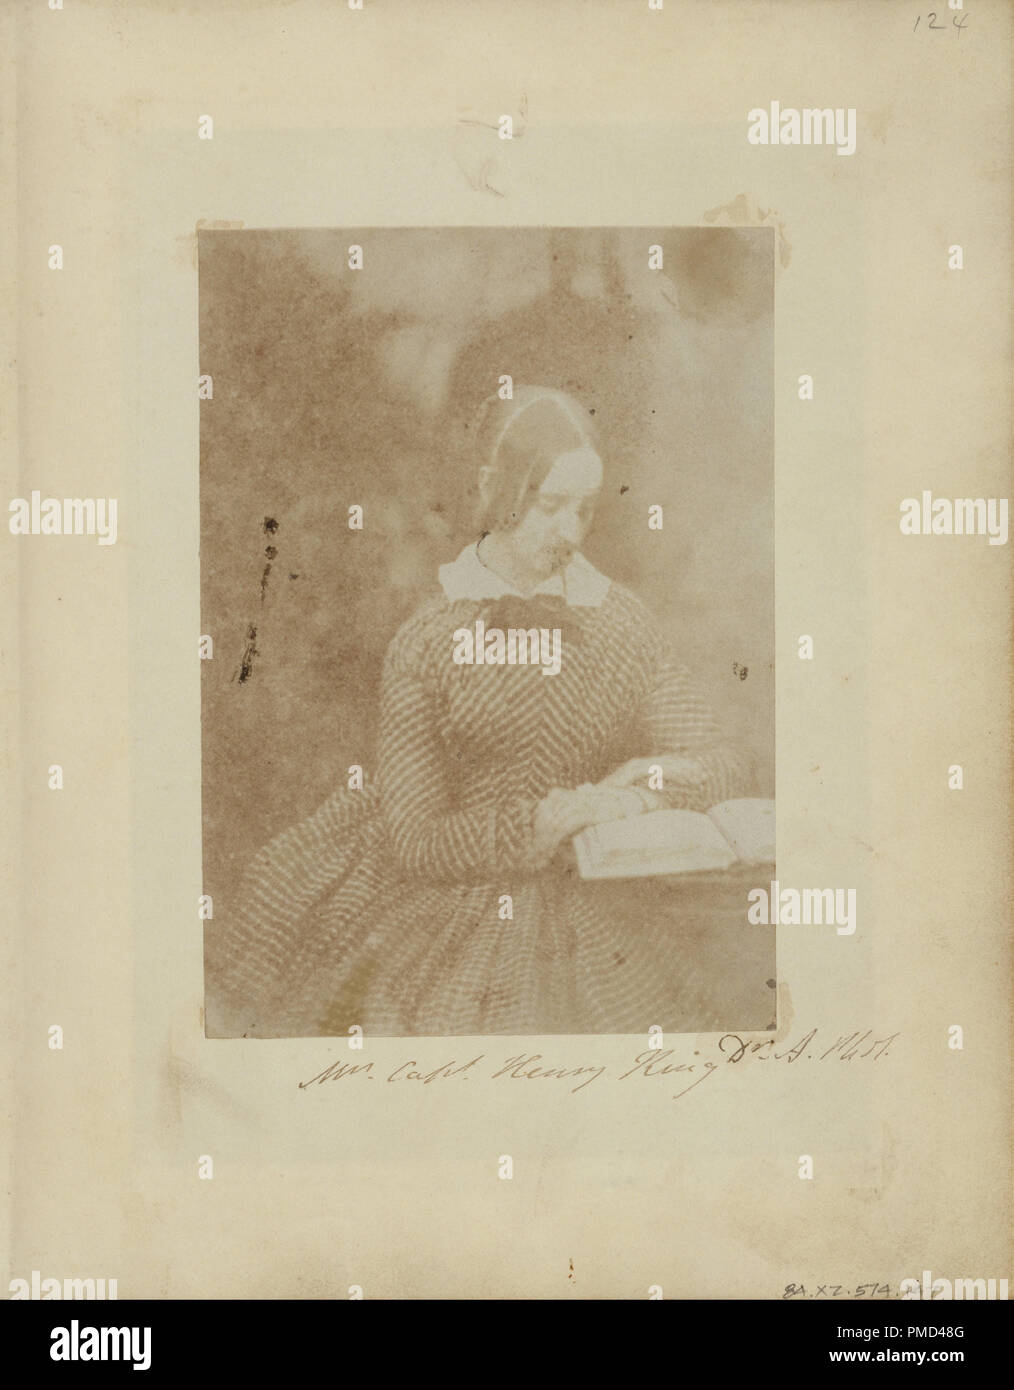 Mrs. Henry King. Date/Period: 1845 - 1850. Print. Salt, from a calotype negative. Height: 140 mm (5.51 in); Width: 98 mm (3.85 in). Author: Dr. John Adamson. Stock Photo